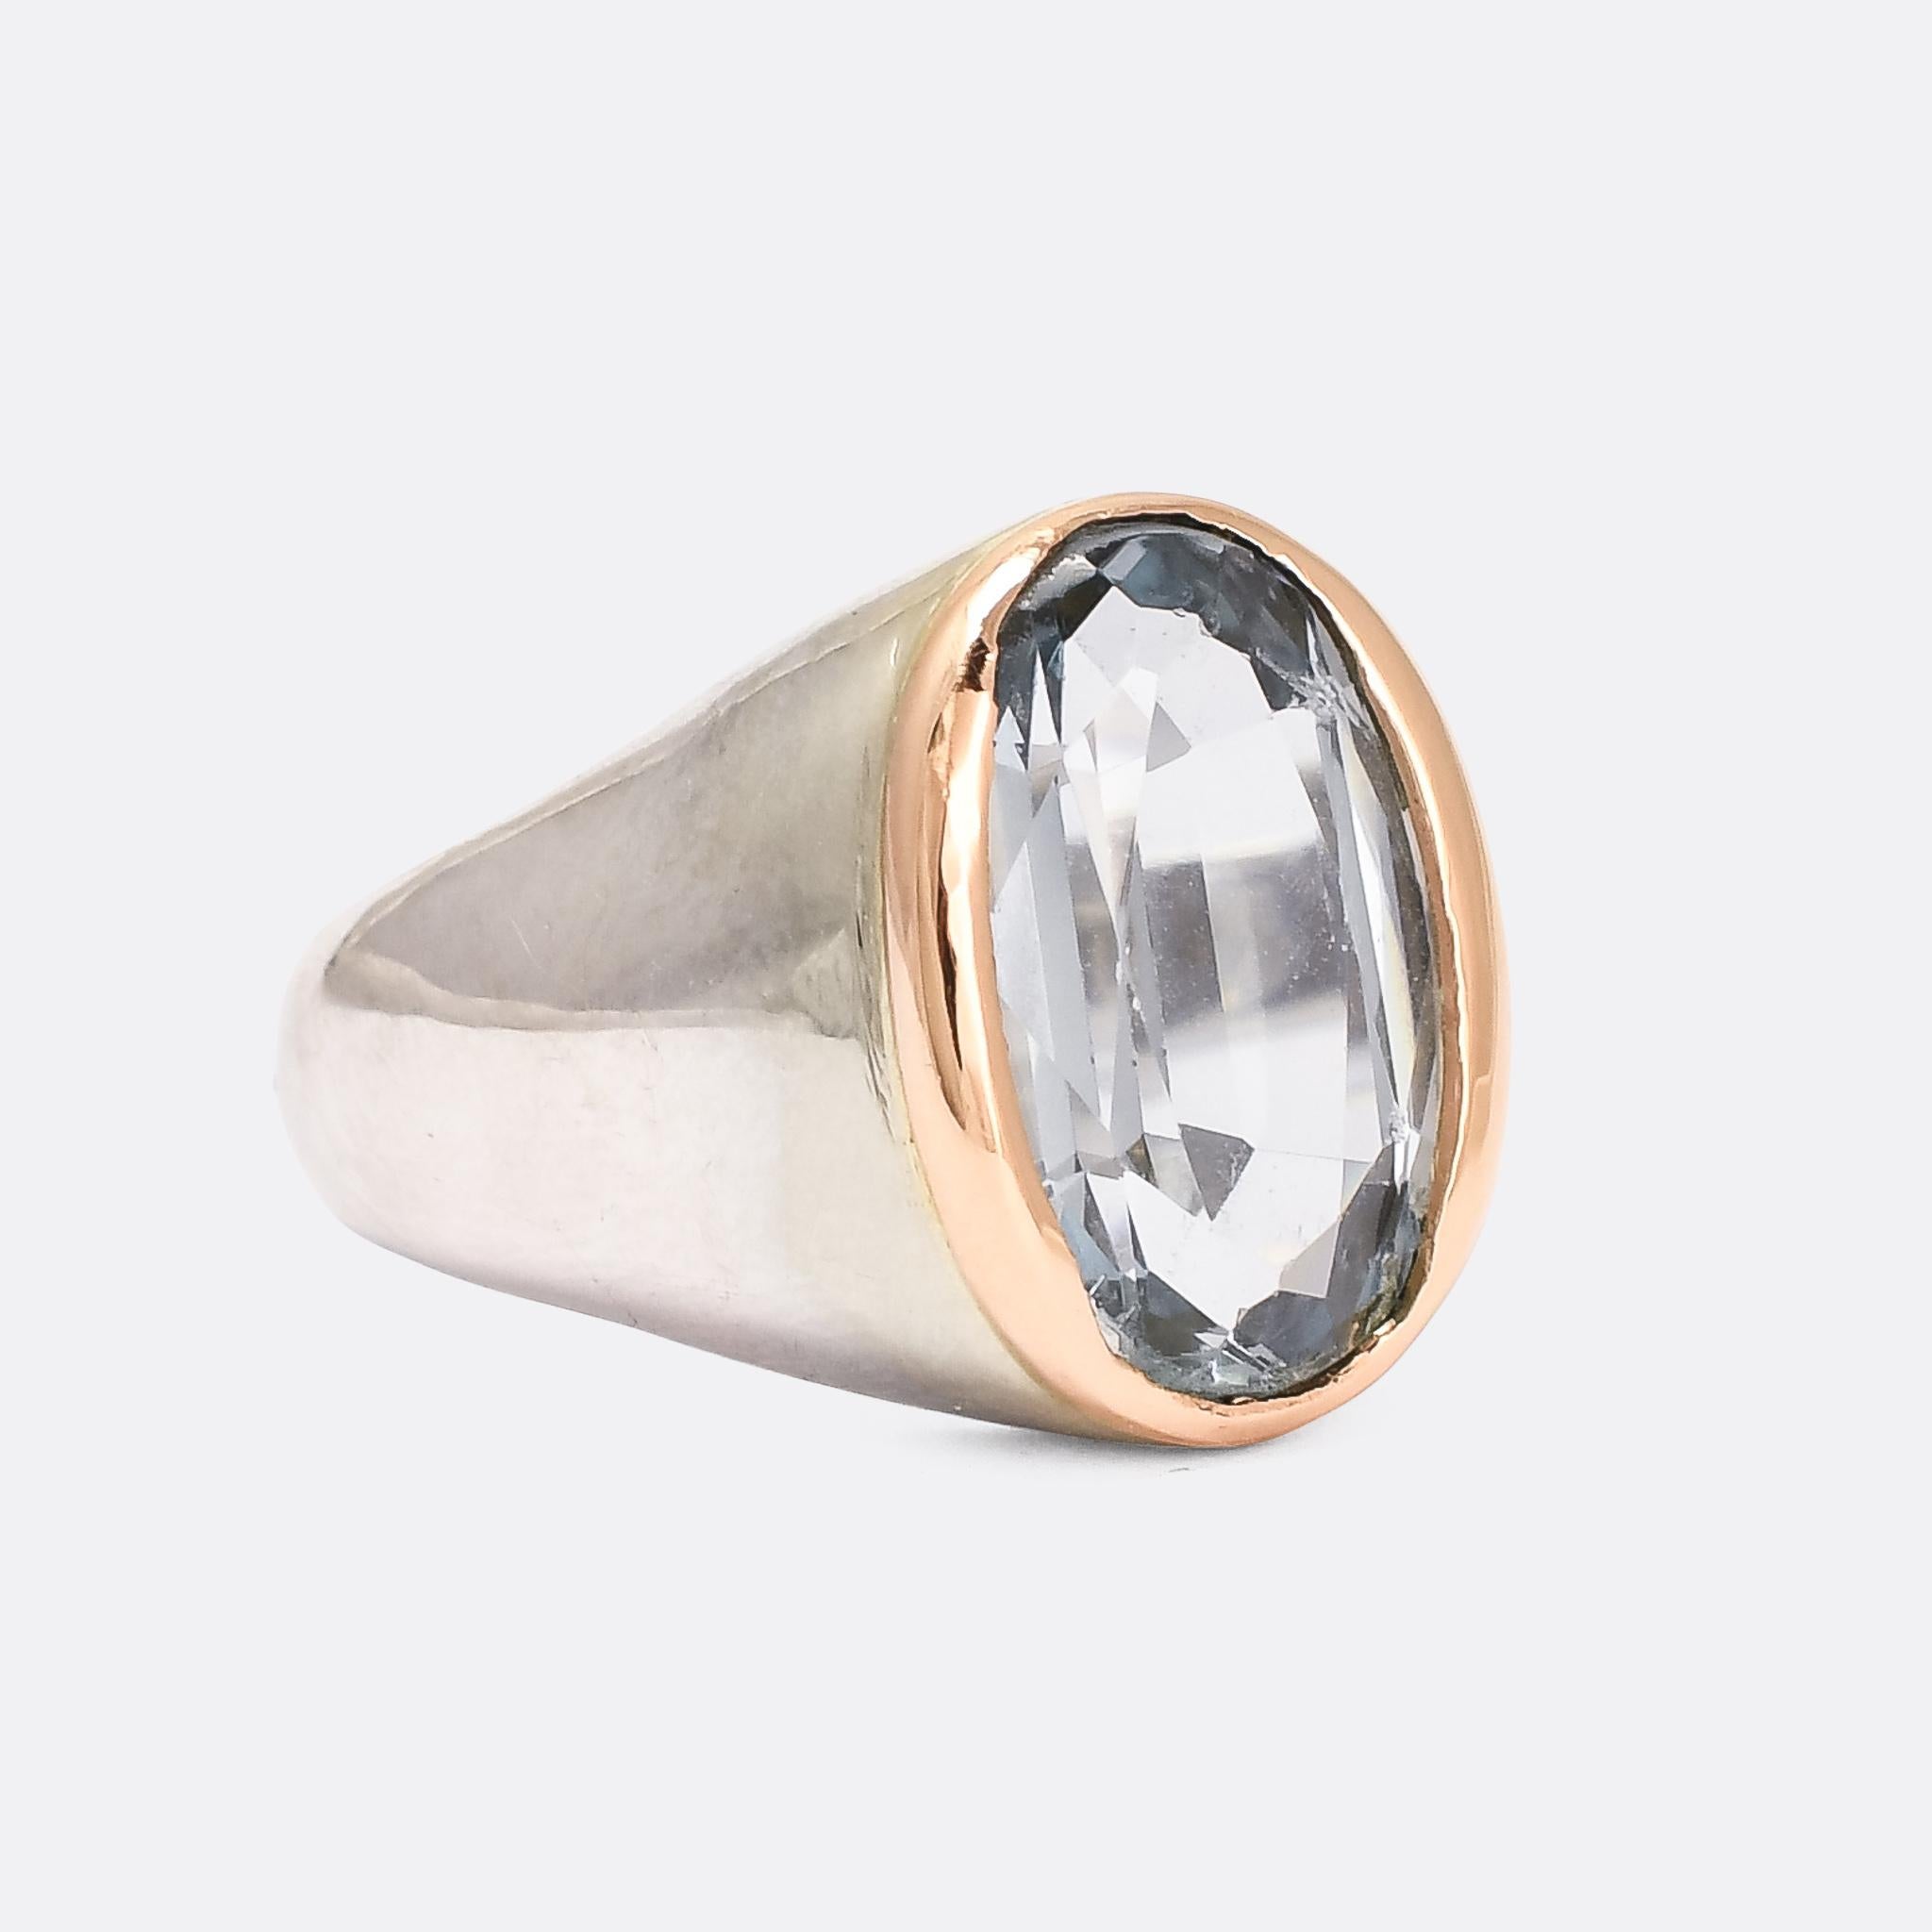 A stunning mid-Century signet ring set with a beautiful 9 carat aquamarine. The ring itself is modelled in platinum, with a rose gold bezel setting around the stone - a particularly attractive colour combination. It dates from the 1950s, with French